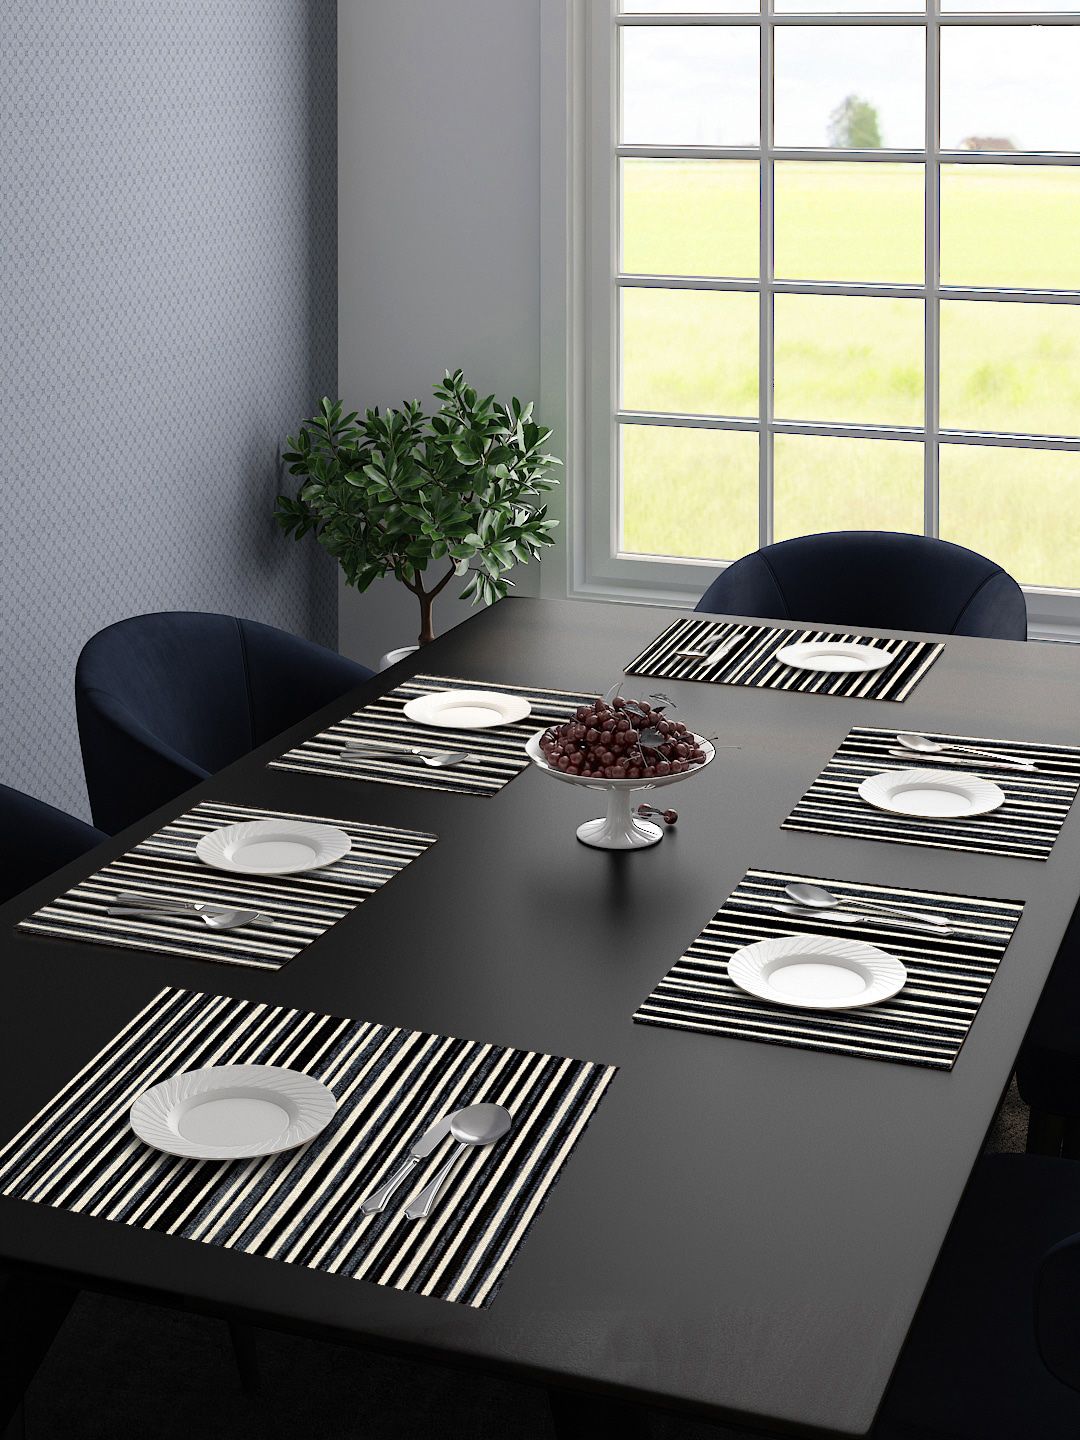 Saral Home Set Of 6 Beige & Black Striped Table Placemats Price in India